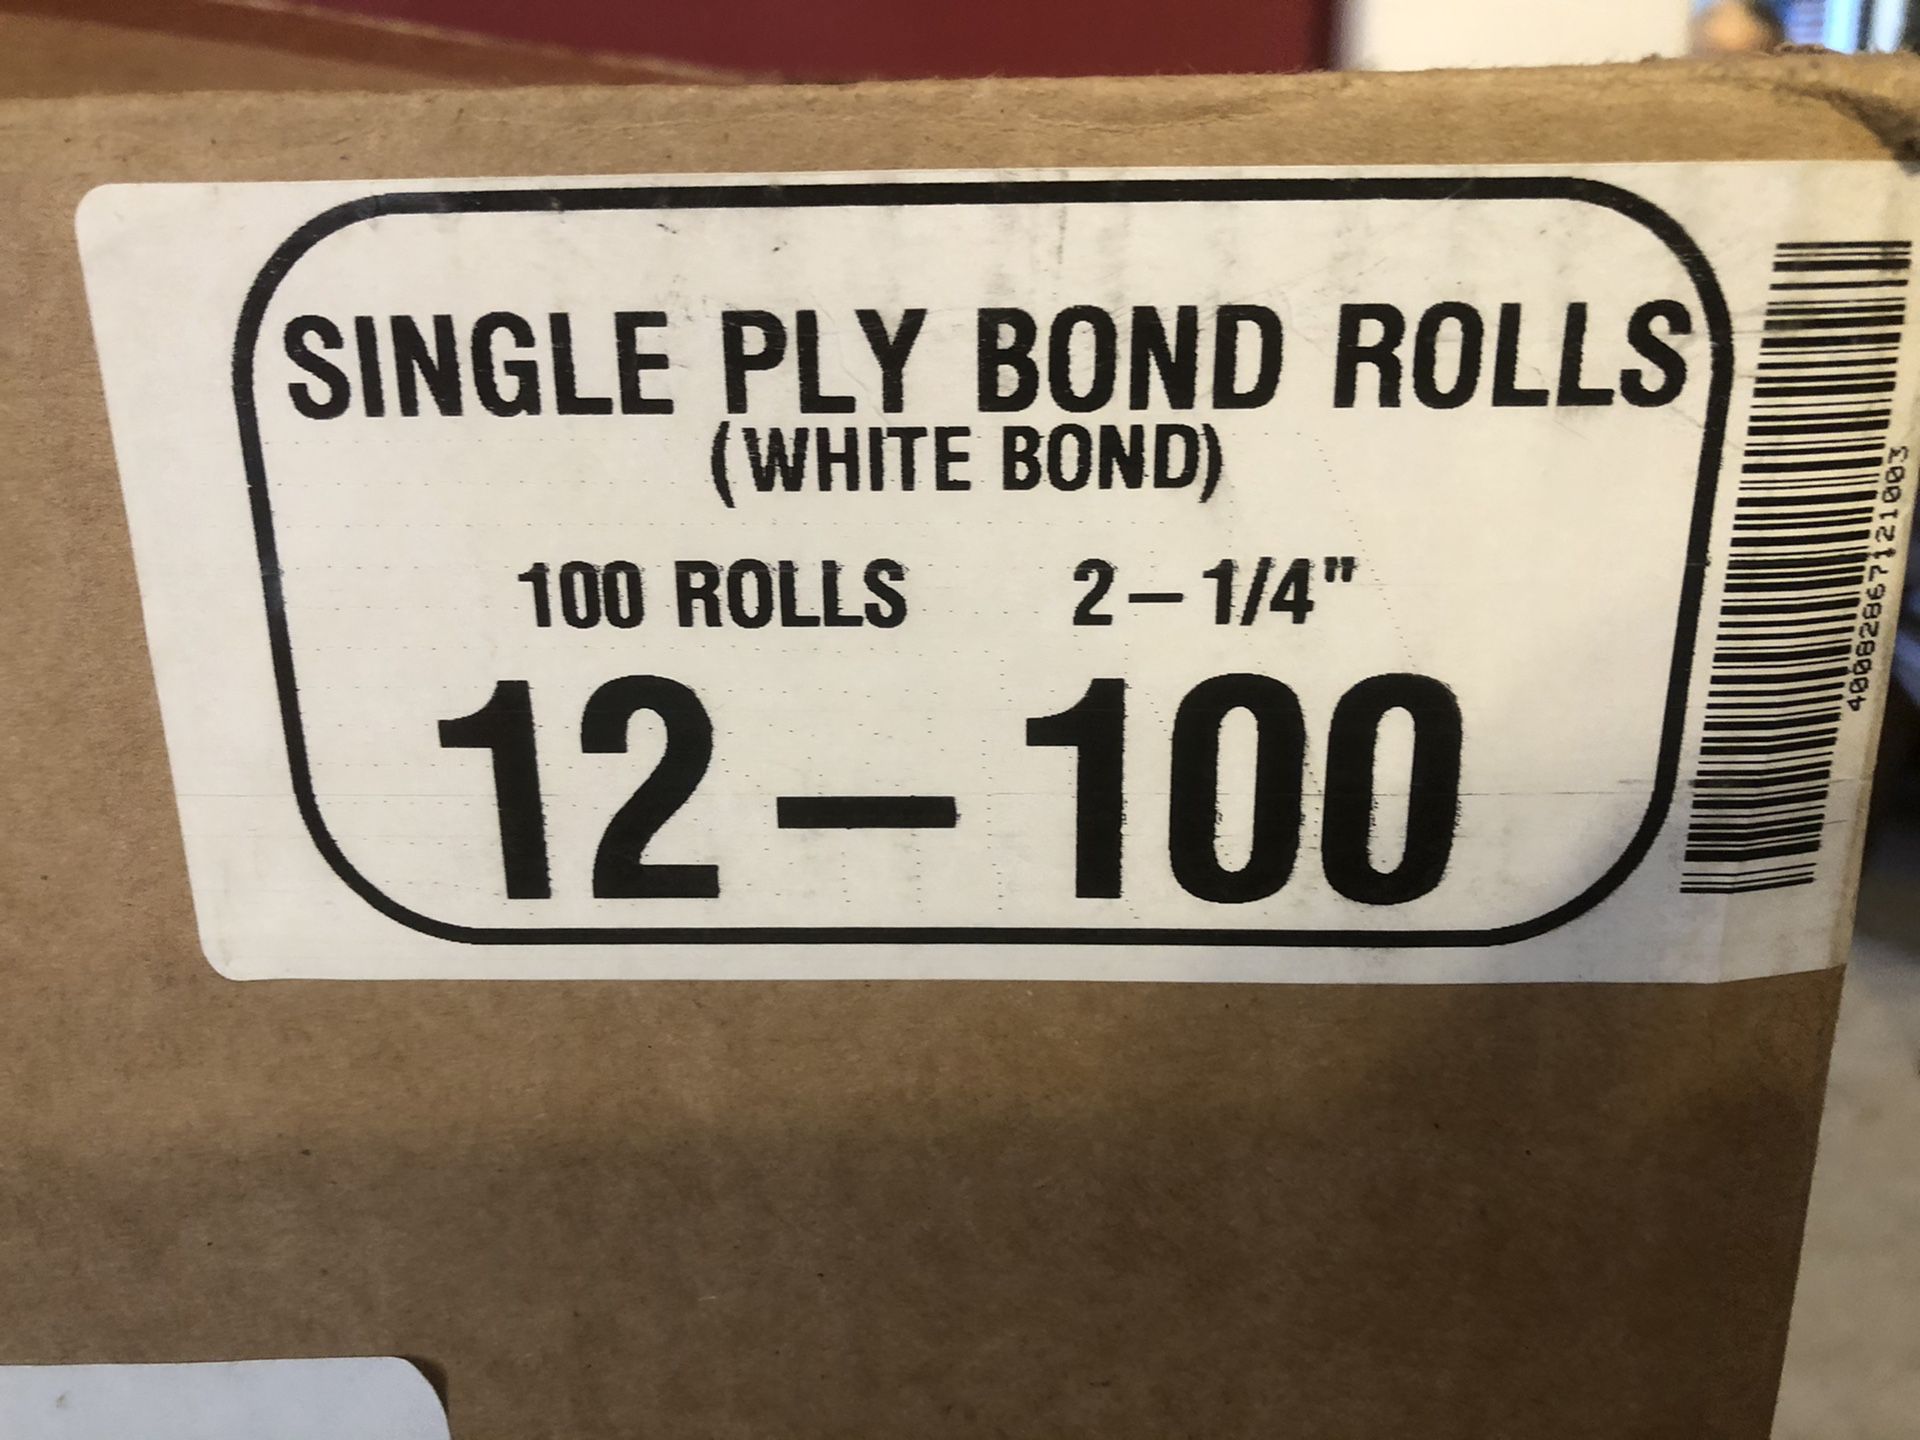 New rolls of white paper